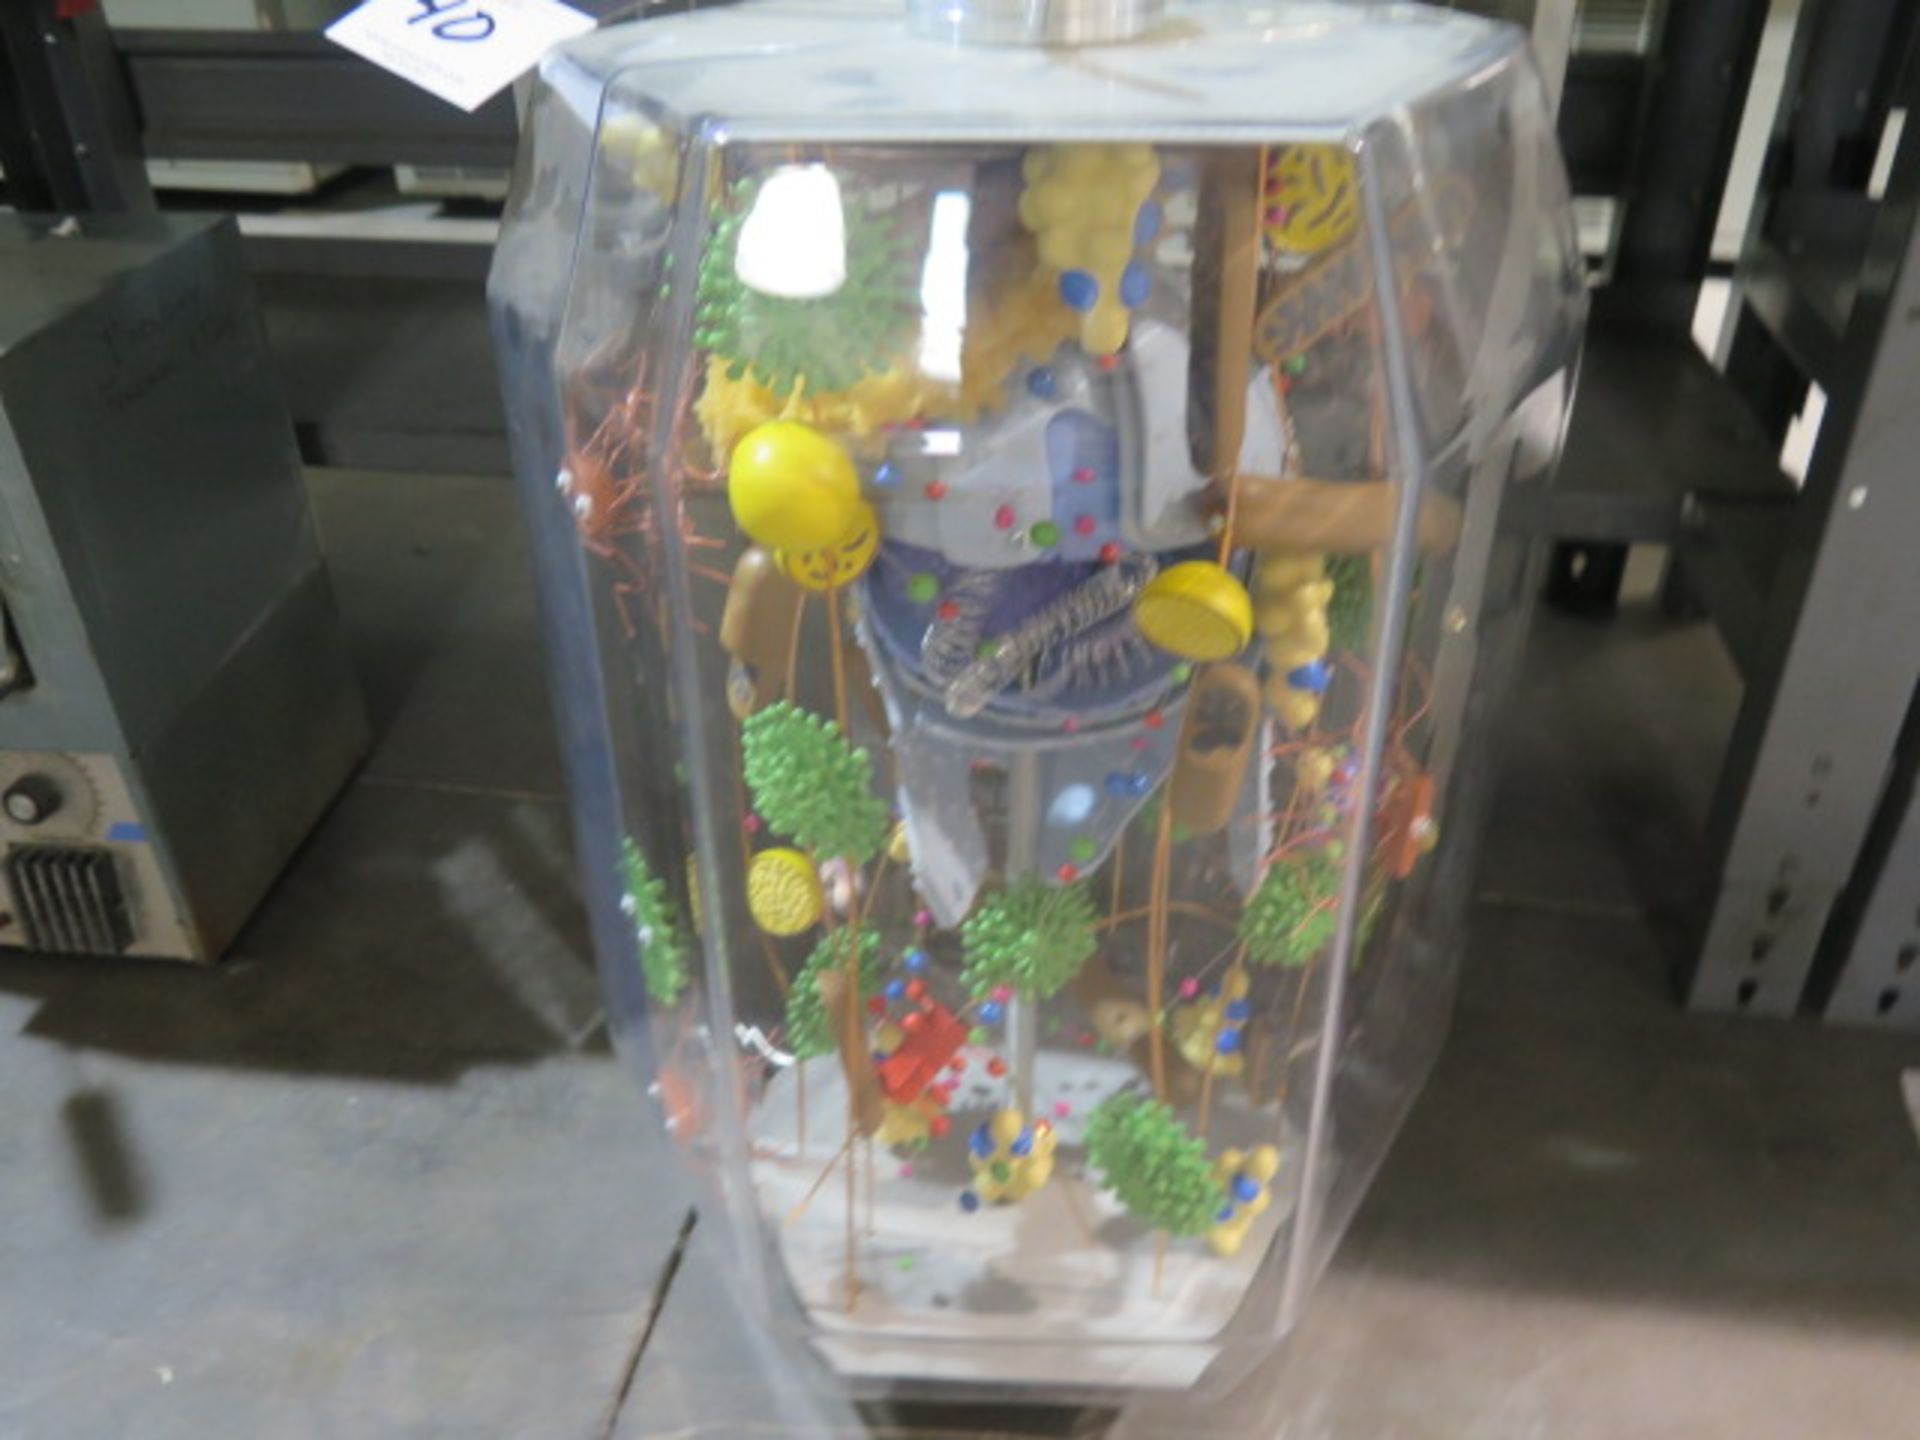 Cell Anatomy Display (SOLD AS-IS - NO WARRANTY) - Image 3 of 4